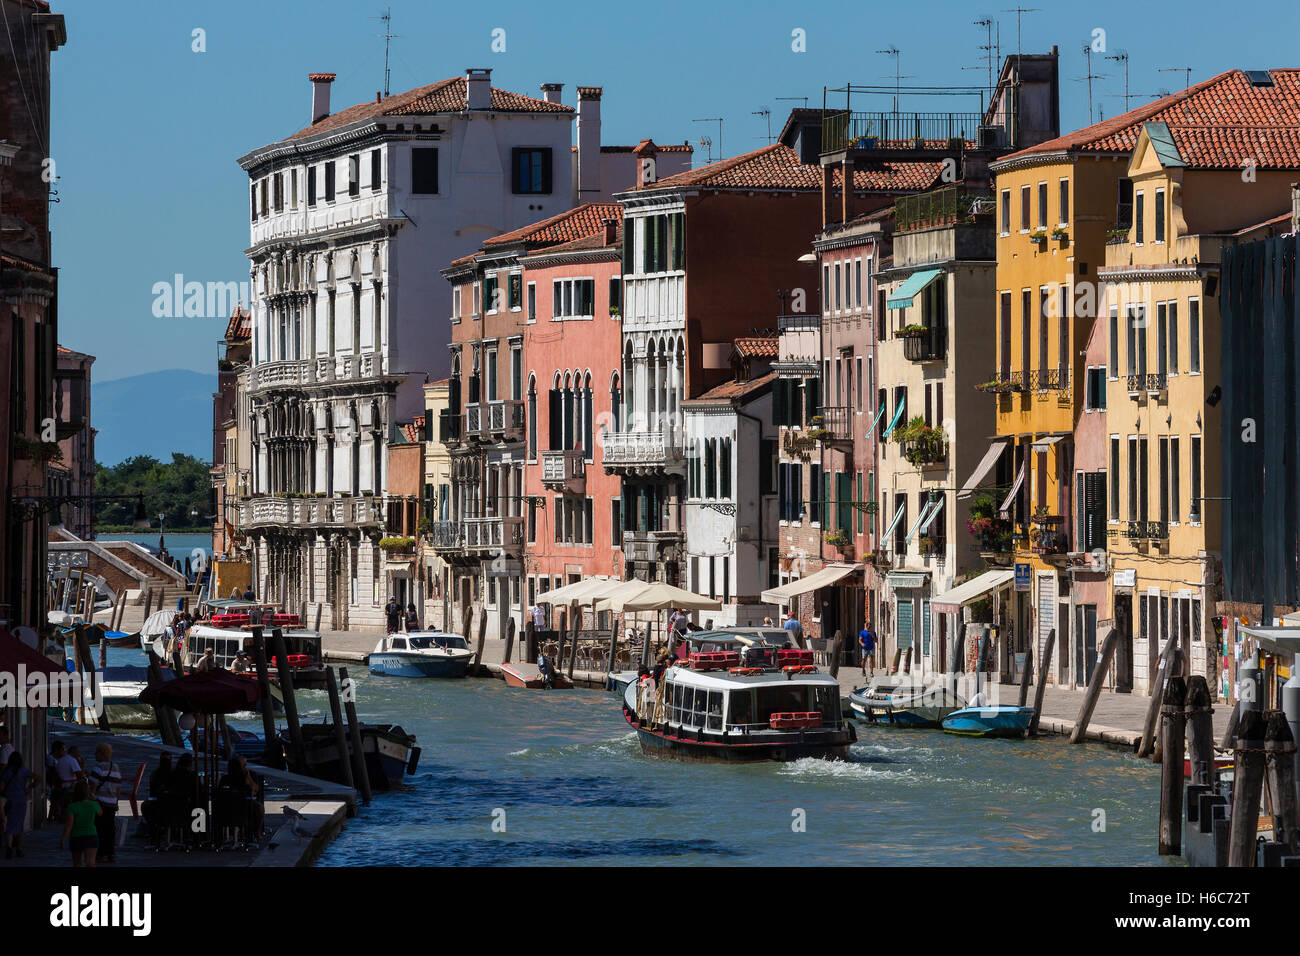 A busy waterway in Venice in northern Italy. Stock Photo